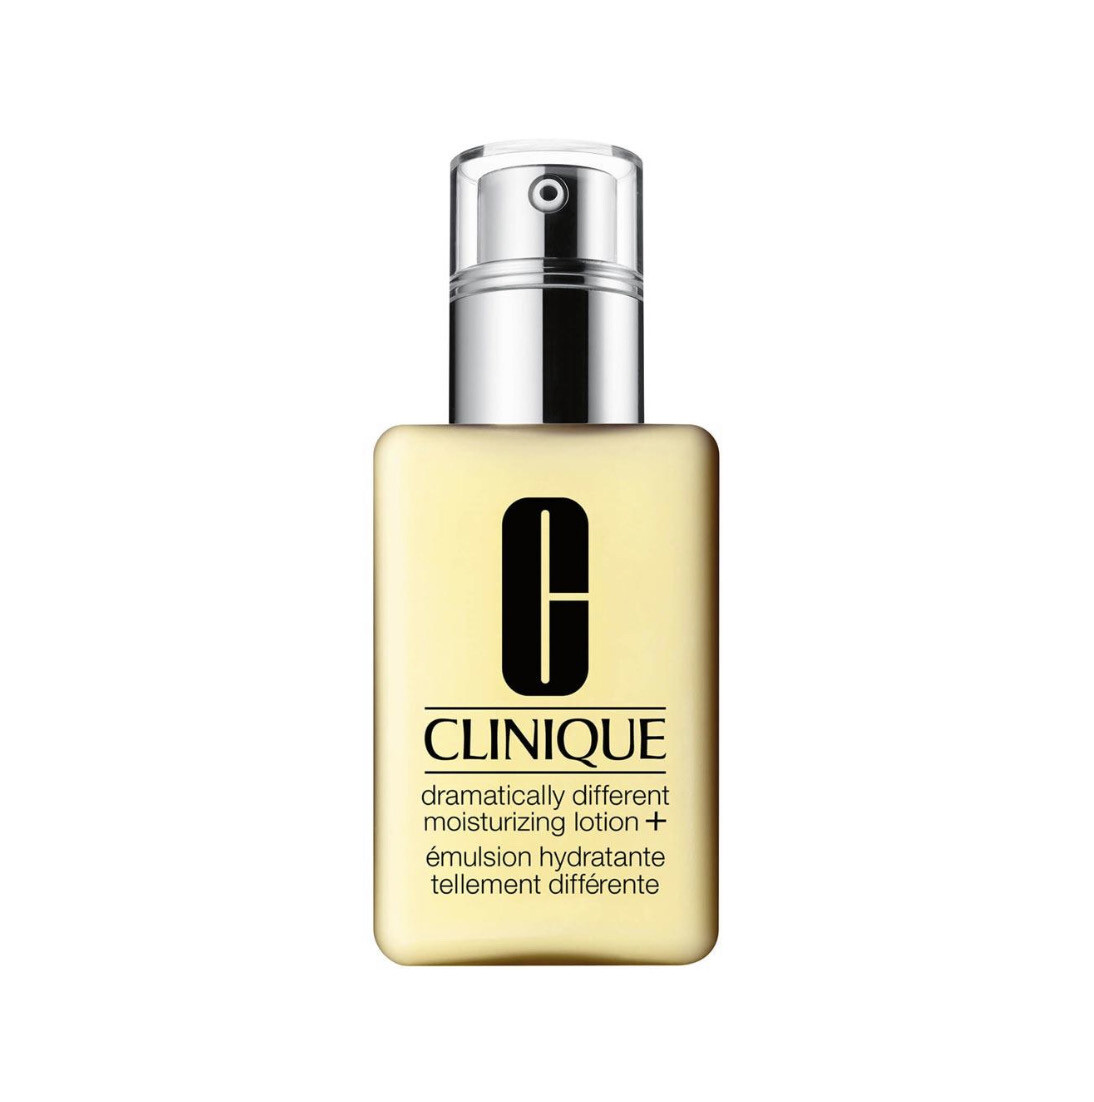 CLINIQUE - Dramatically Different Moisturizing Lotion - Dry Skin | 125 mL